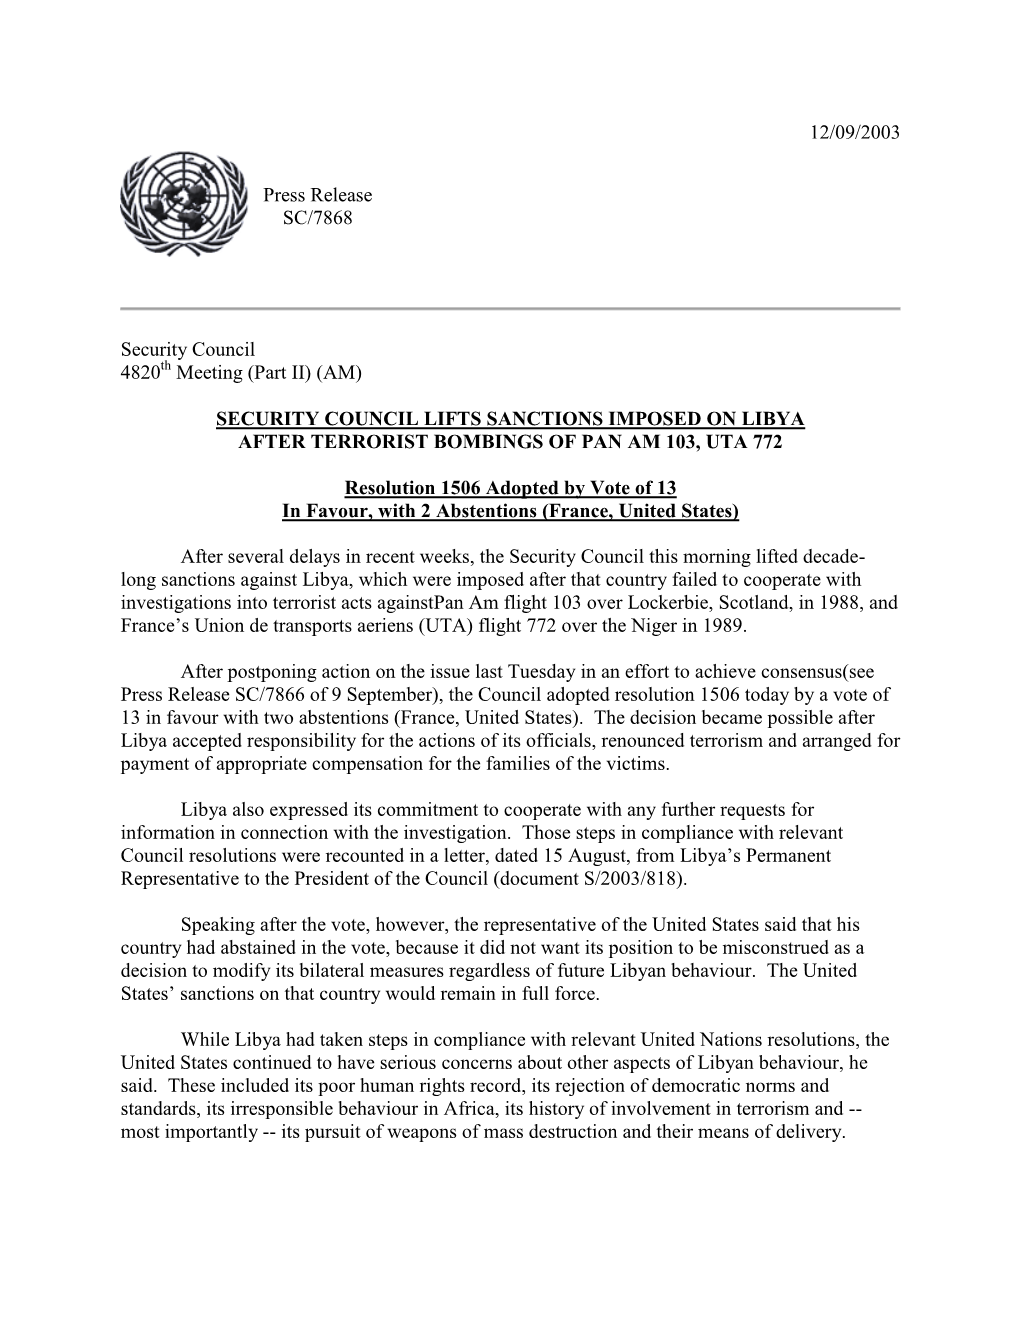 Security Council Lifts Sanctions Imposed on Libya After Terrorist Bombings of Pan Am 103, Uta 772